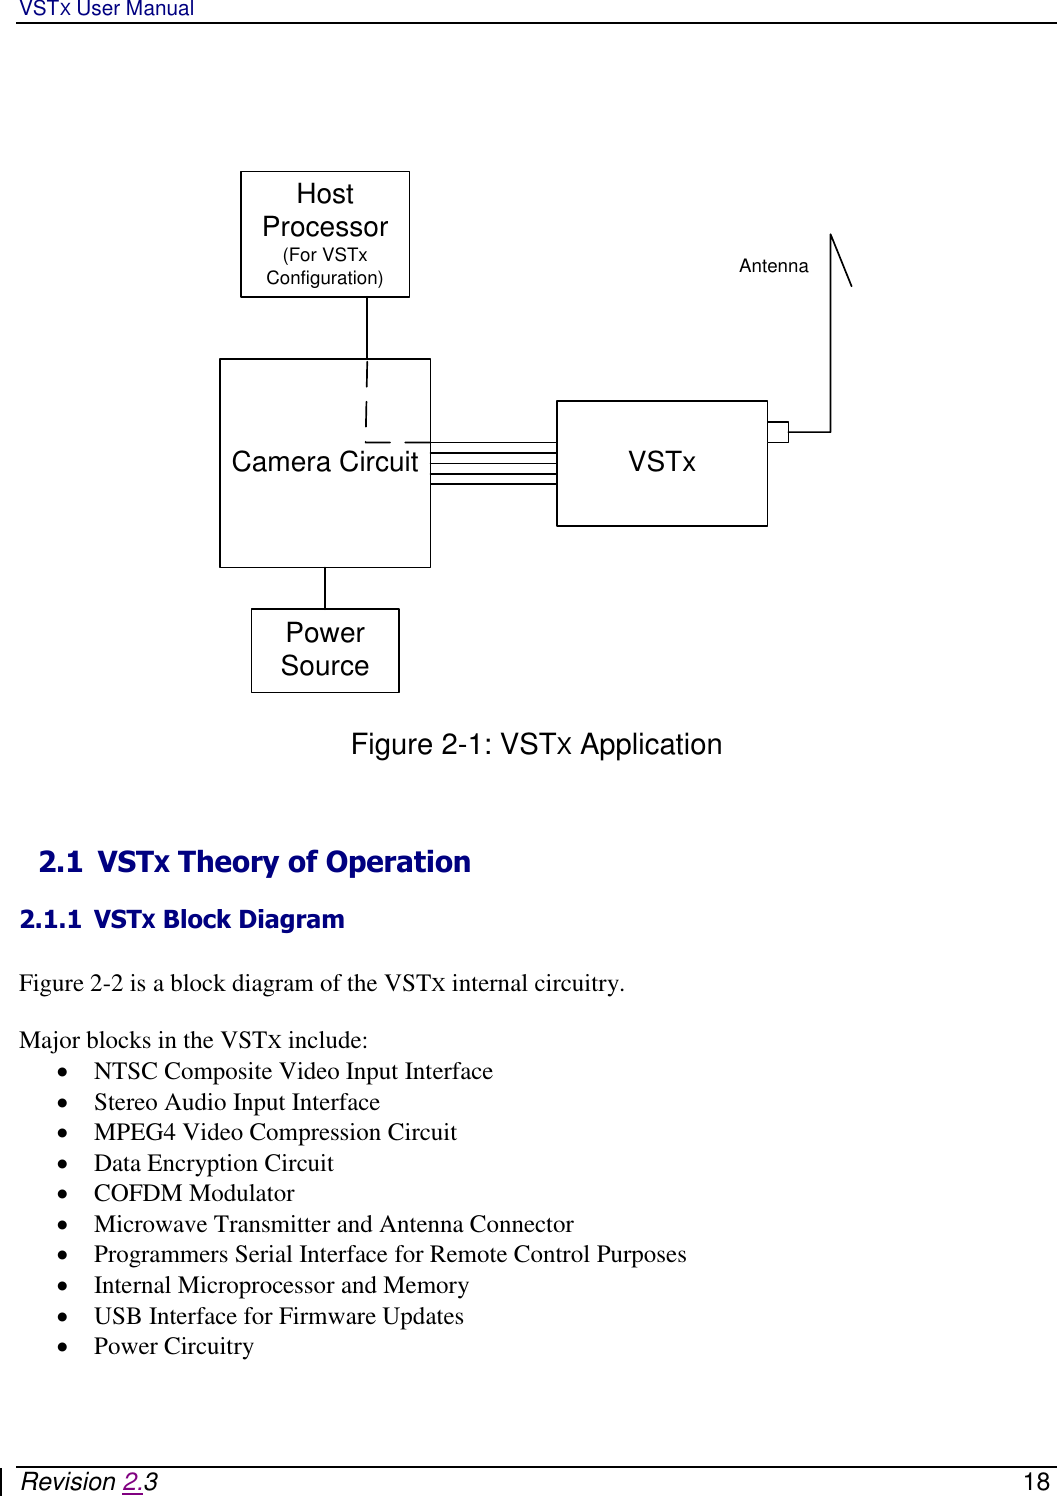 VSTX User Manual   Revision 2.3    18     VSTxCamera CircuitPower SourceHost Processor(For VSTx Configuration) Antenna  Figure 2-1: VSTX Application   2.1 VSTX Theory of Operation 2.1.1 VSTX Block Diagram  Figure 2-2 is a block diagram of the VSTX internal circuitry.  Major blocks in the VSTX include:   NTSC Composite Video Input Interface  Stereo Audio Input Interface  MPEG4 Video Compression Circuit  Data Encryption Circuit  COFDM Modulator  Microwave Transmitter and Antenna Connector  Programmers Serial Interface for Remote Control Purposes  Internal Microprocessor and Memory  USB Interface for Firmware Updates  Power Circuitry     